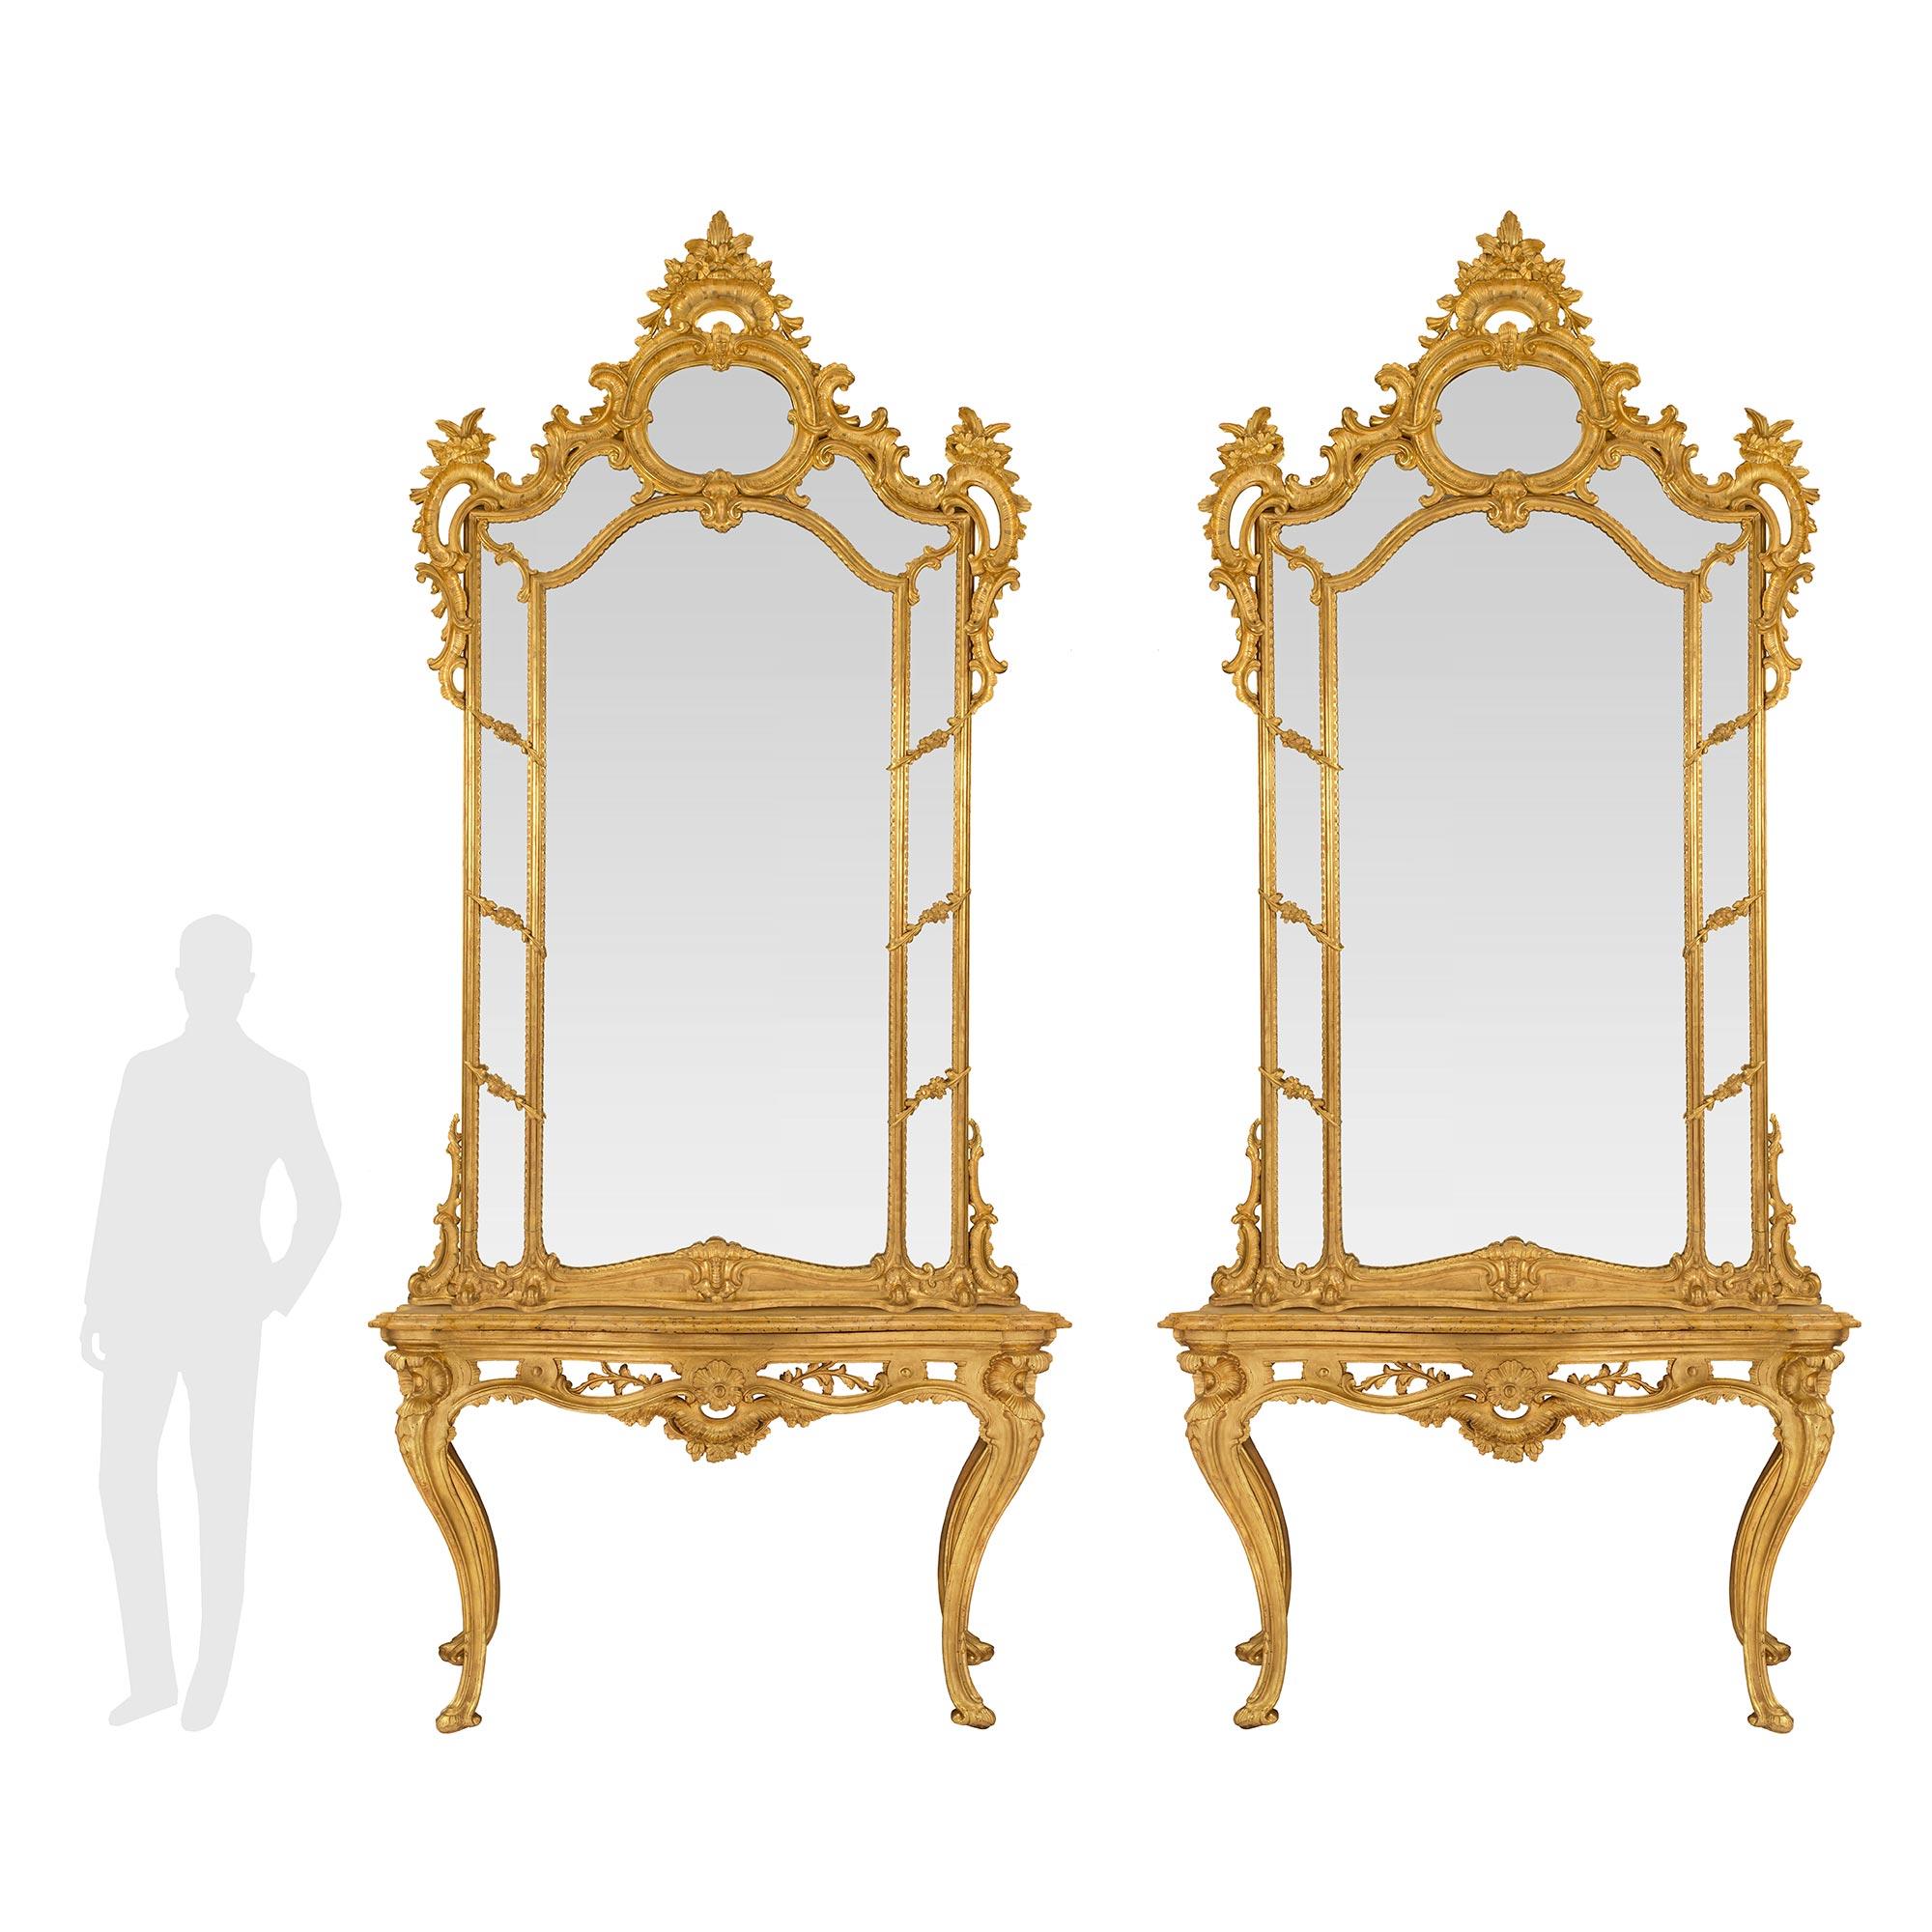 A sensational and palatially scaled pair of Italian 18th century Louis XV period giltwood and marble Neapolitan consoles with their original matching mirrors. Each stunning console is raised by most elegant tapered cabriole legs with most decorative